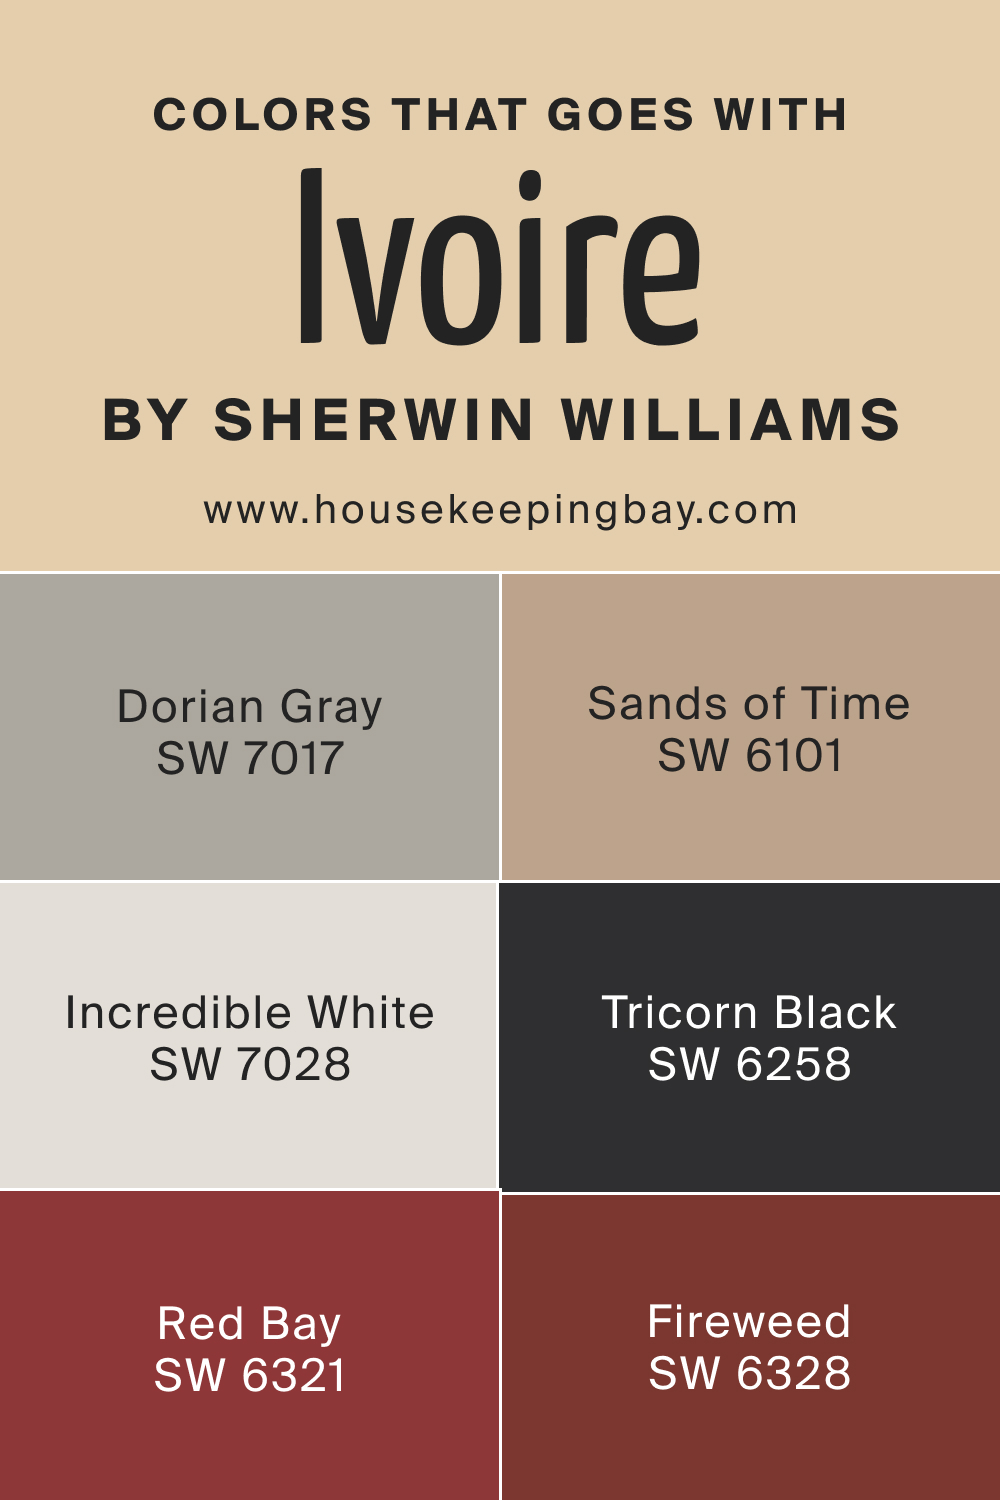 Colors that goes with SW Ivoire by Sherwin Williams